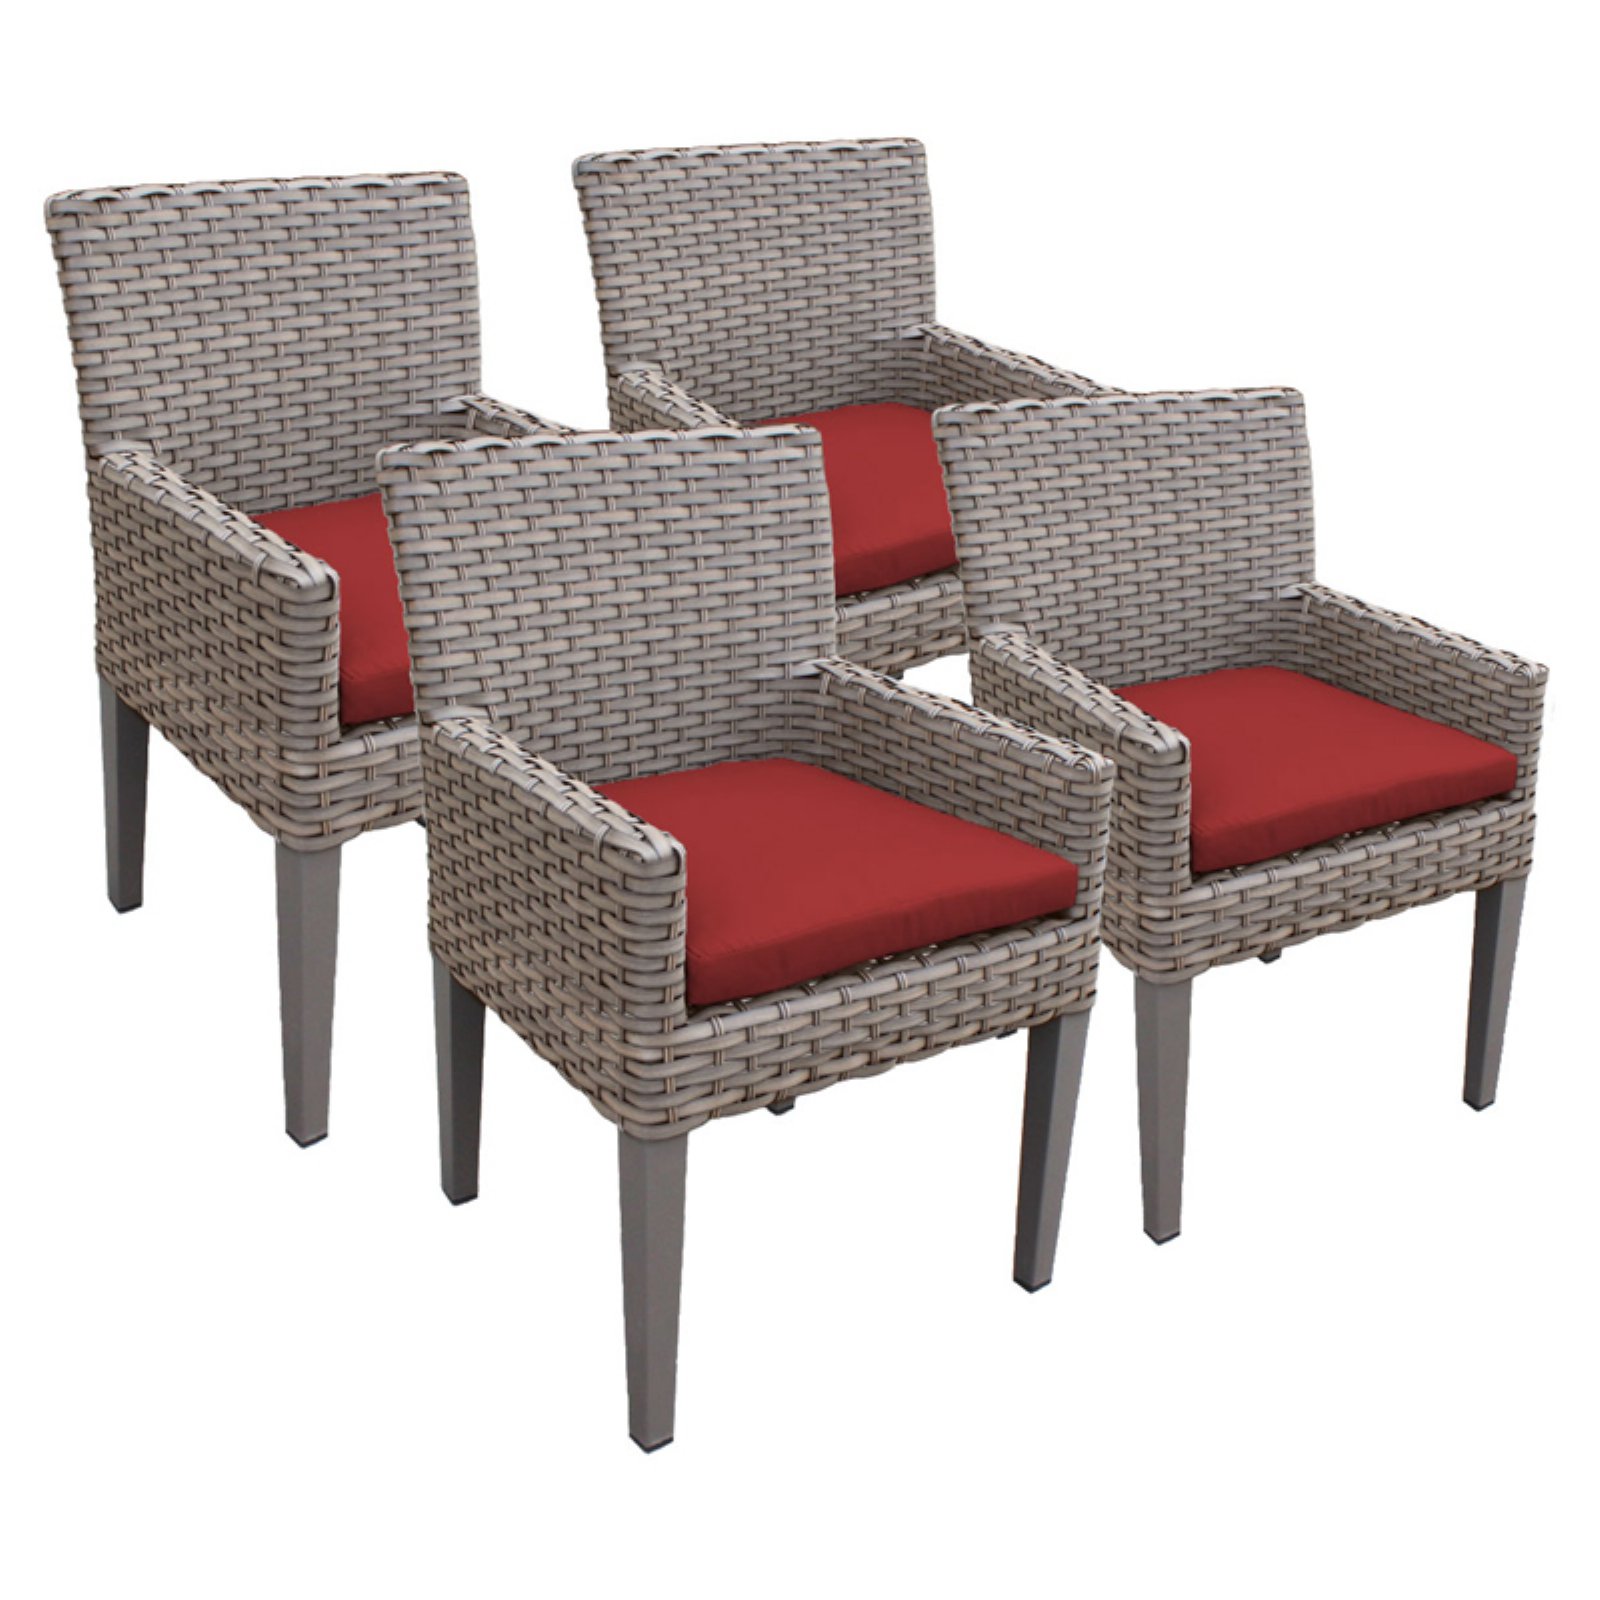 TK Classics Oasis Patio Dining Arm Chair in Navy (Set of 4) - image 2 of 2